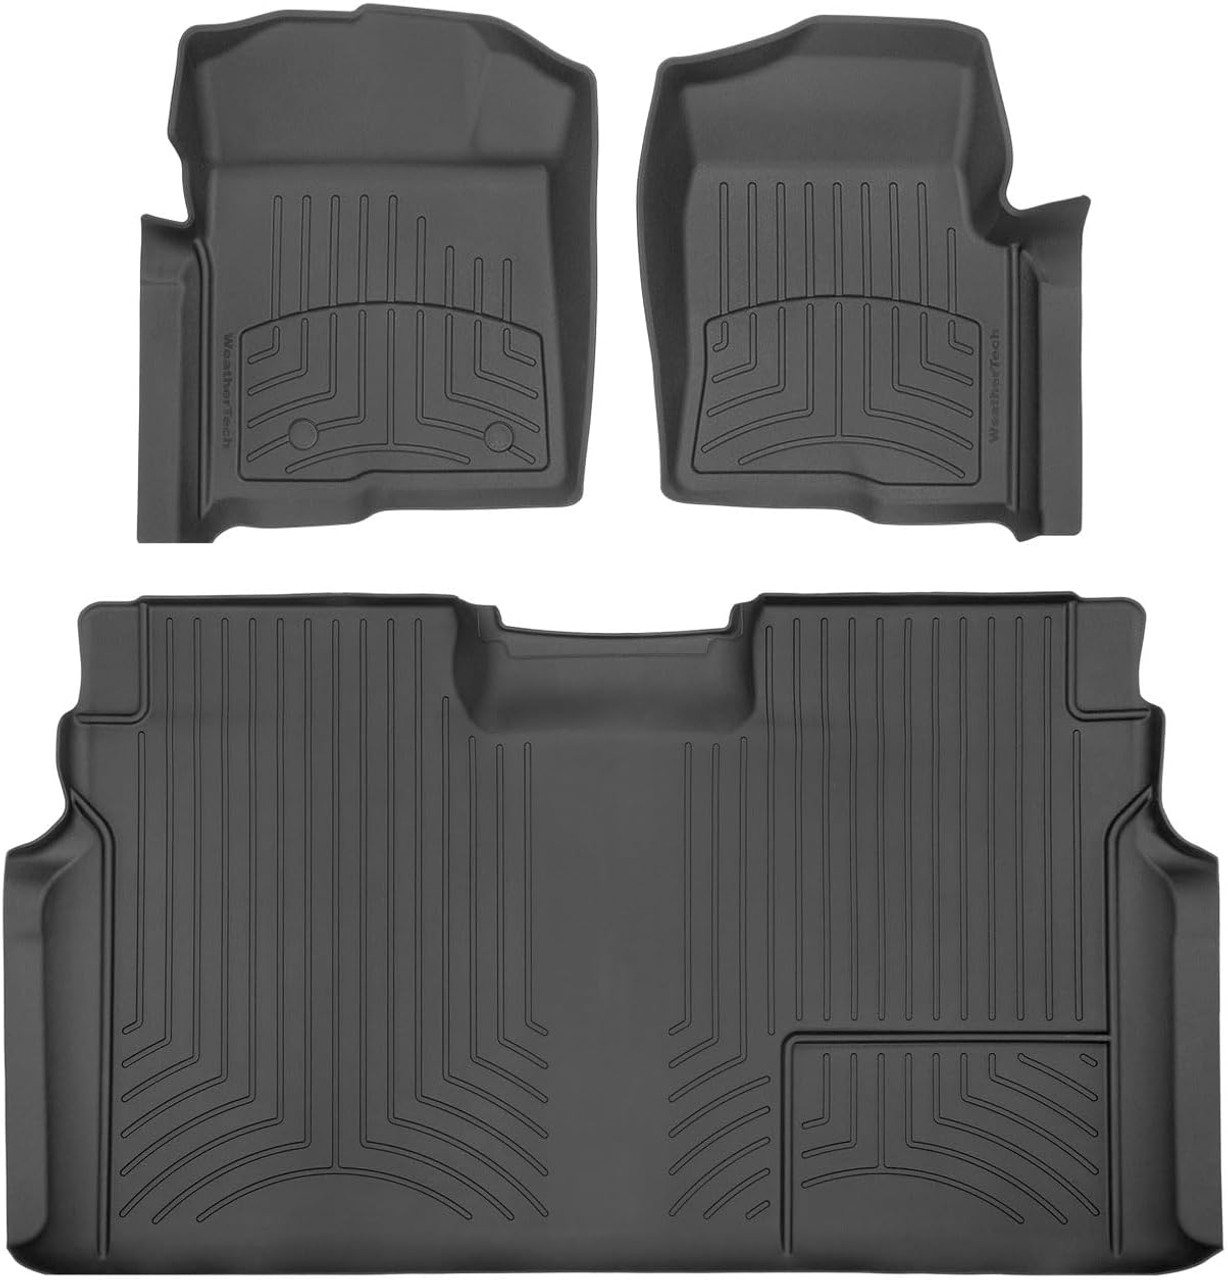 WeatherTech 2010 Ford F-150 Front and Rear FloorLiner HP - Black - 446111IM-441793